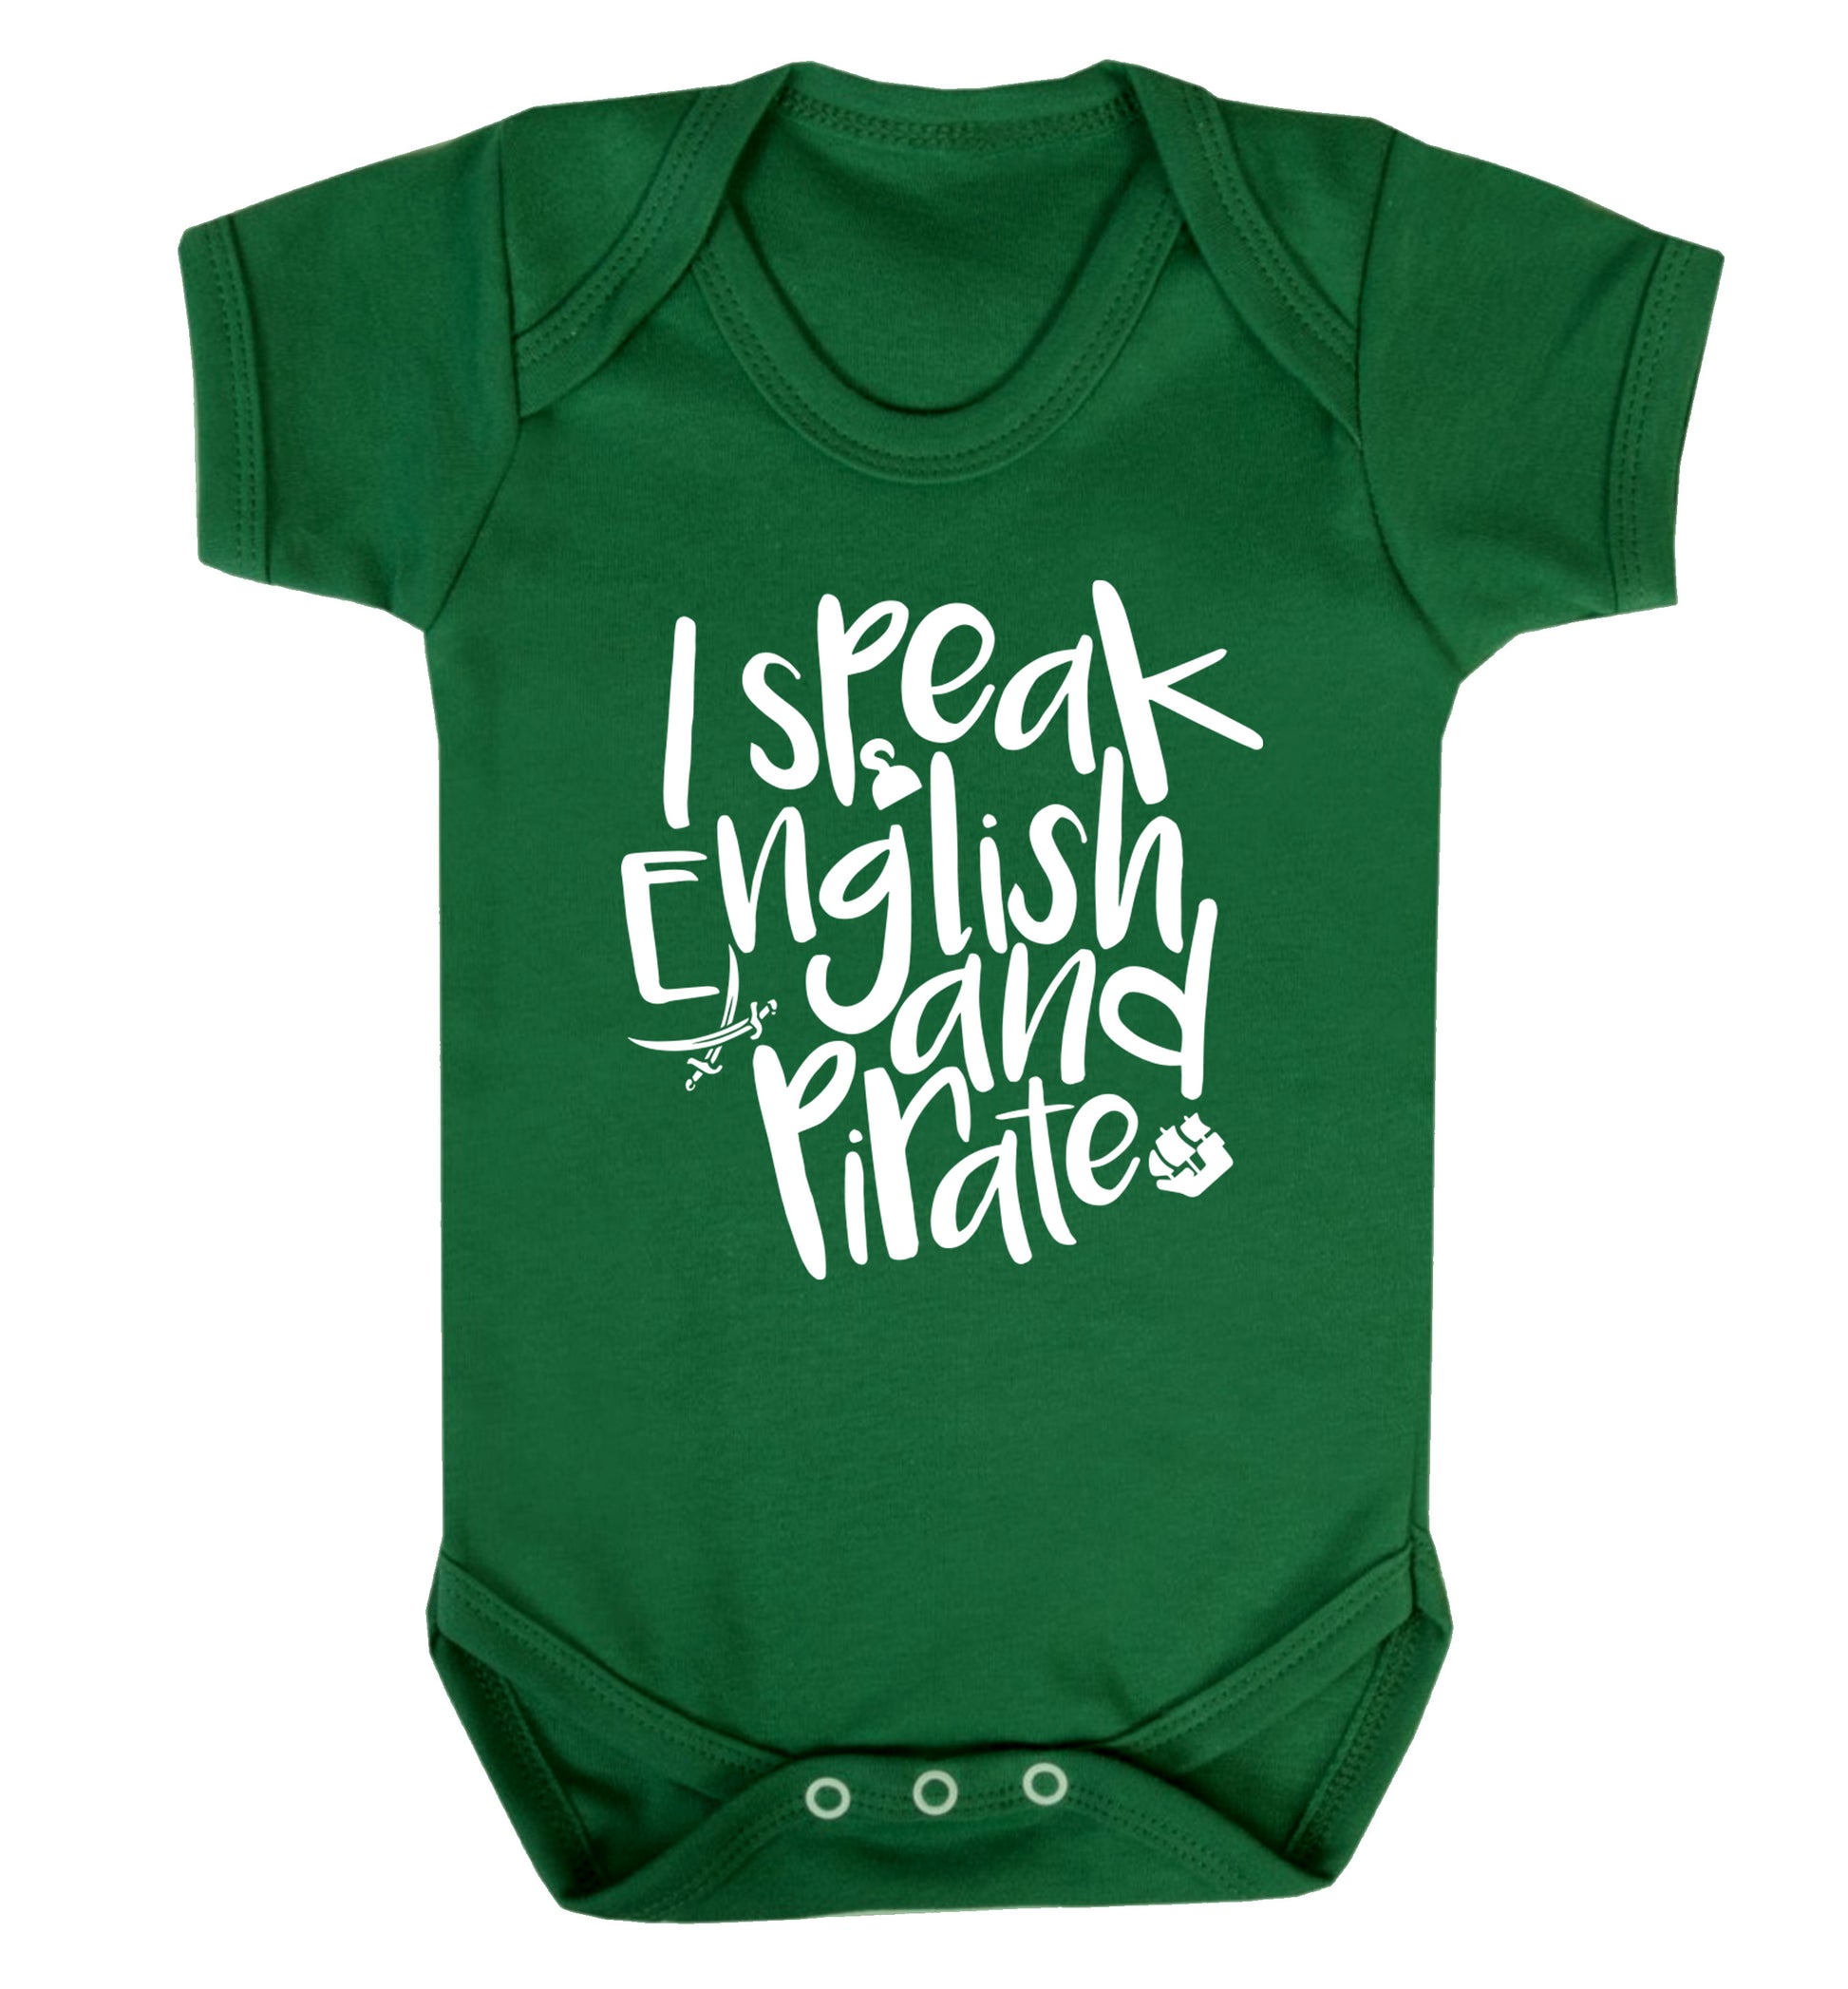 I speak English and pirate Baby Vest green 18-24 months